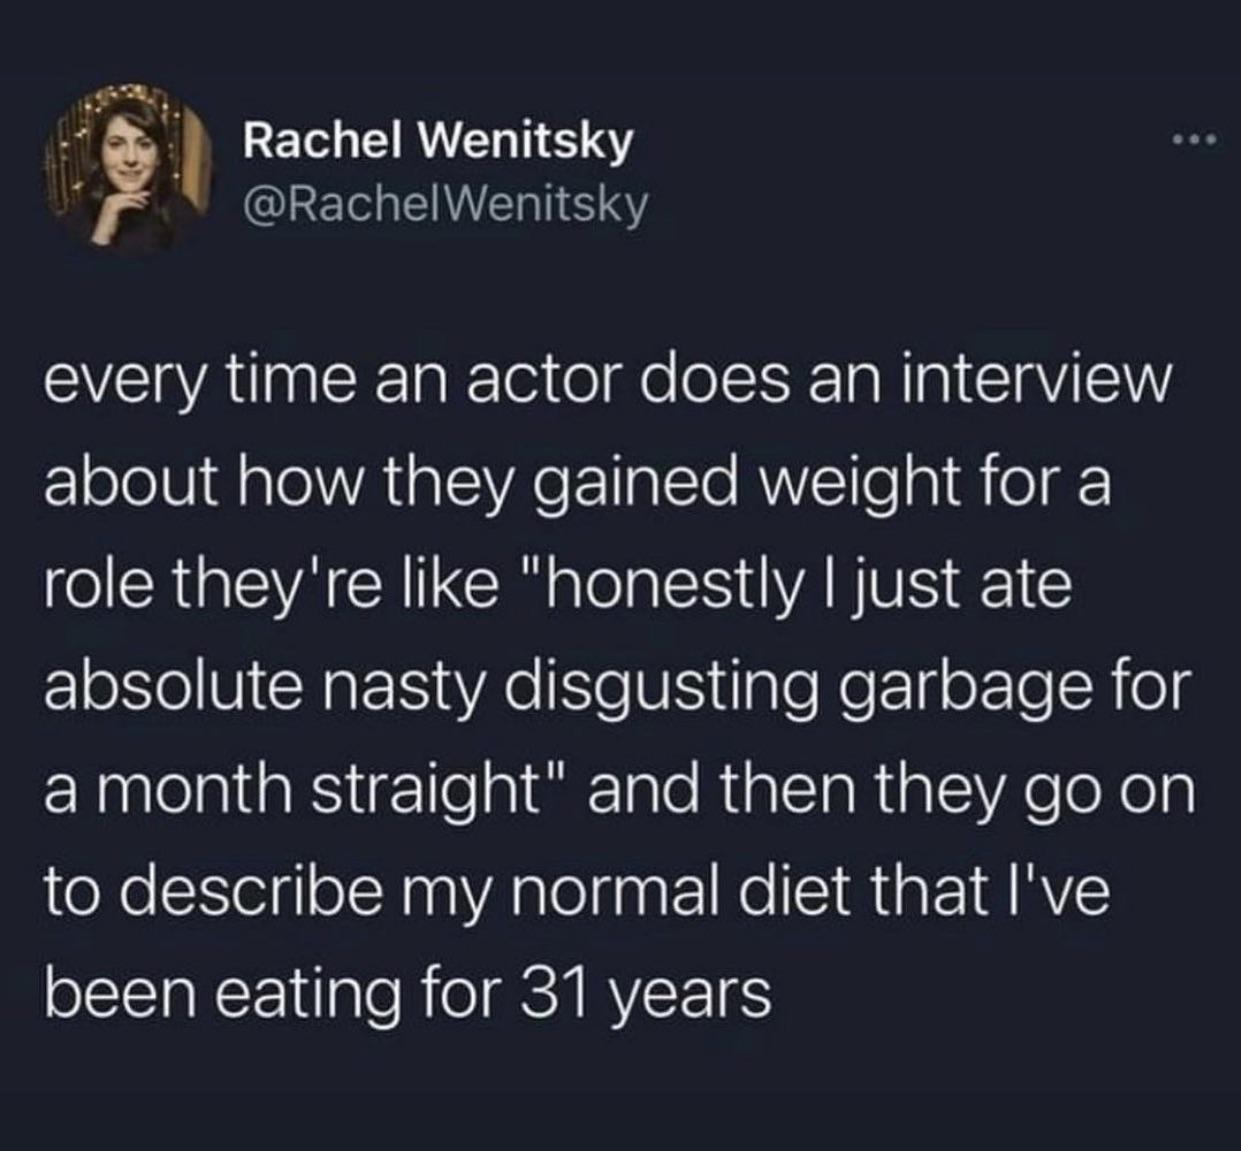 memes reddit twitter - atmosphere - Rachel Wenitsky Wenitsky every time an actor does an interview about how they gained weight for a role they're "honestly I just ate absolute nasty disgusting garbage for a month straight" and then they go on to describe